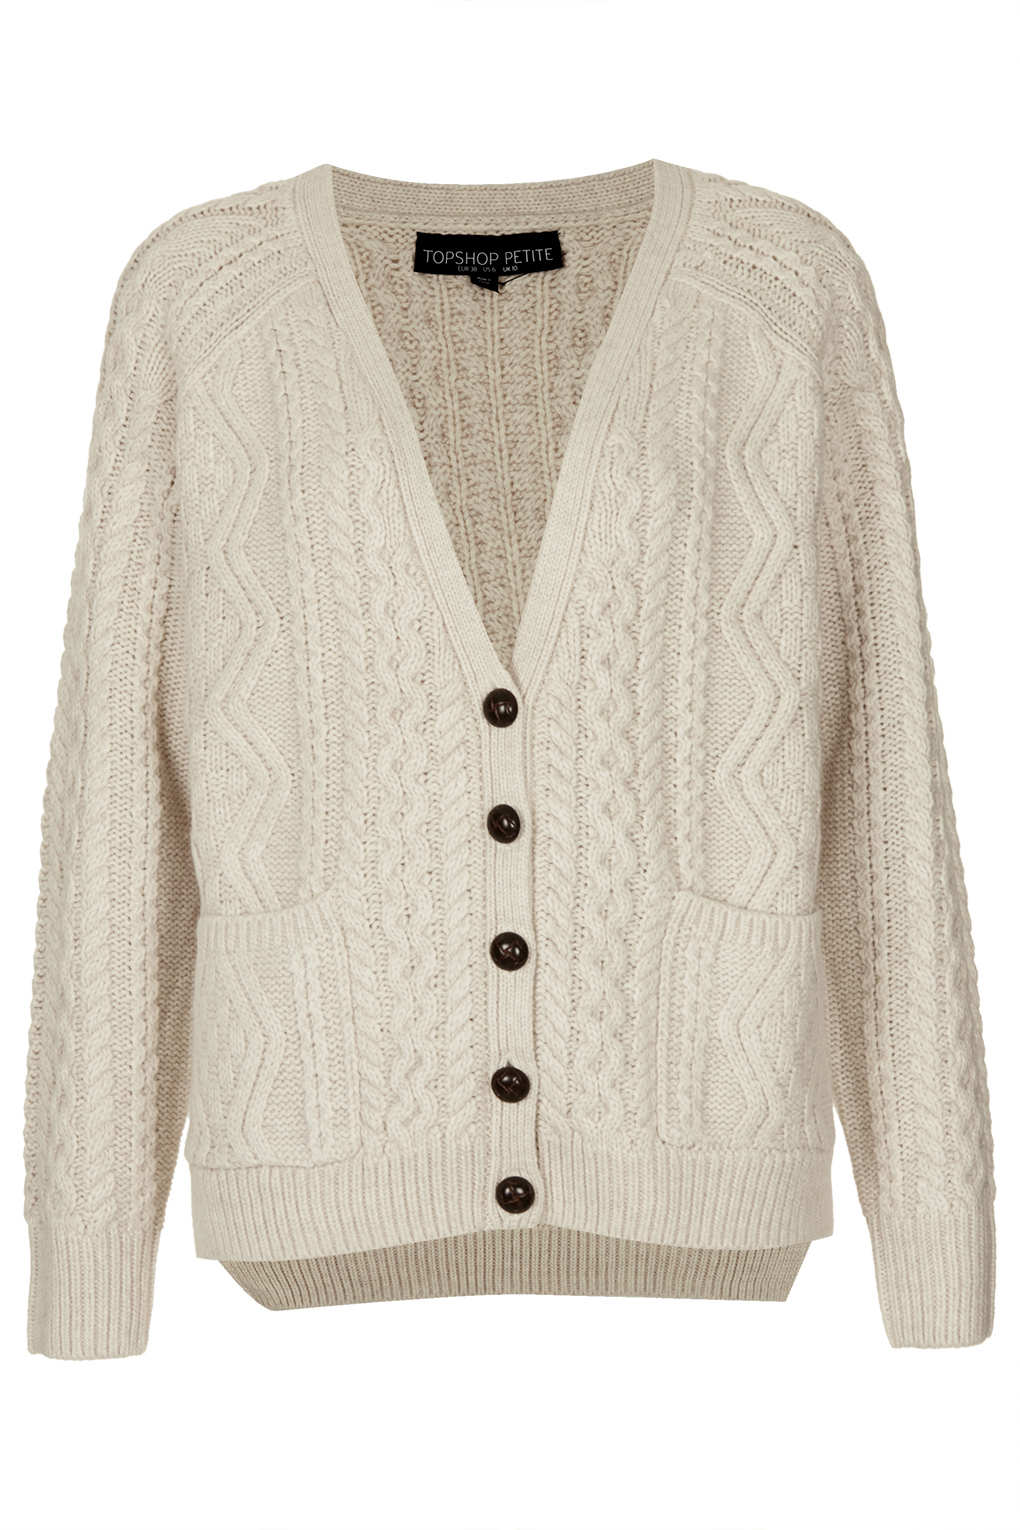 TOPSHOP Petite Knitted Angora Cable Cardigan in Cream (Natural) - Lyst